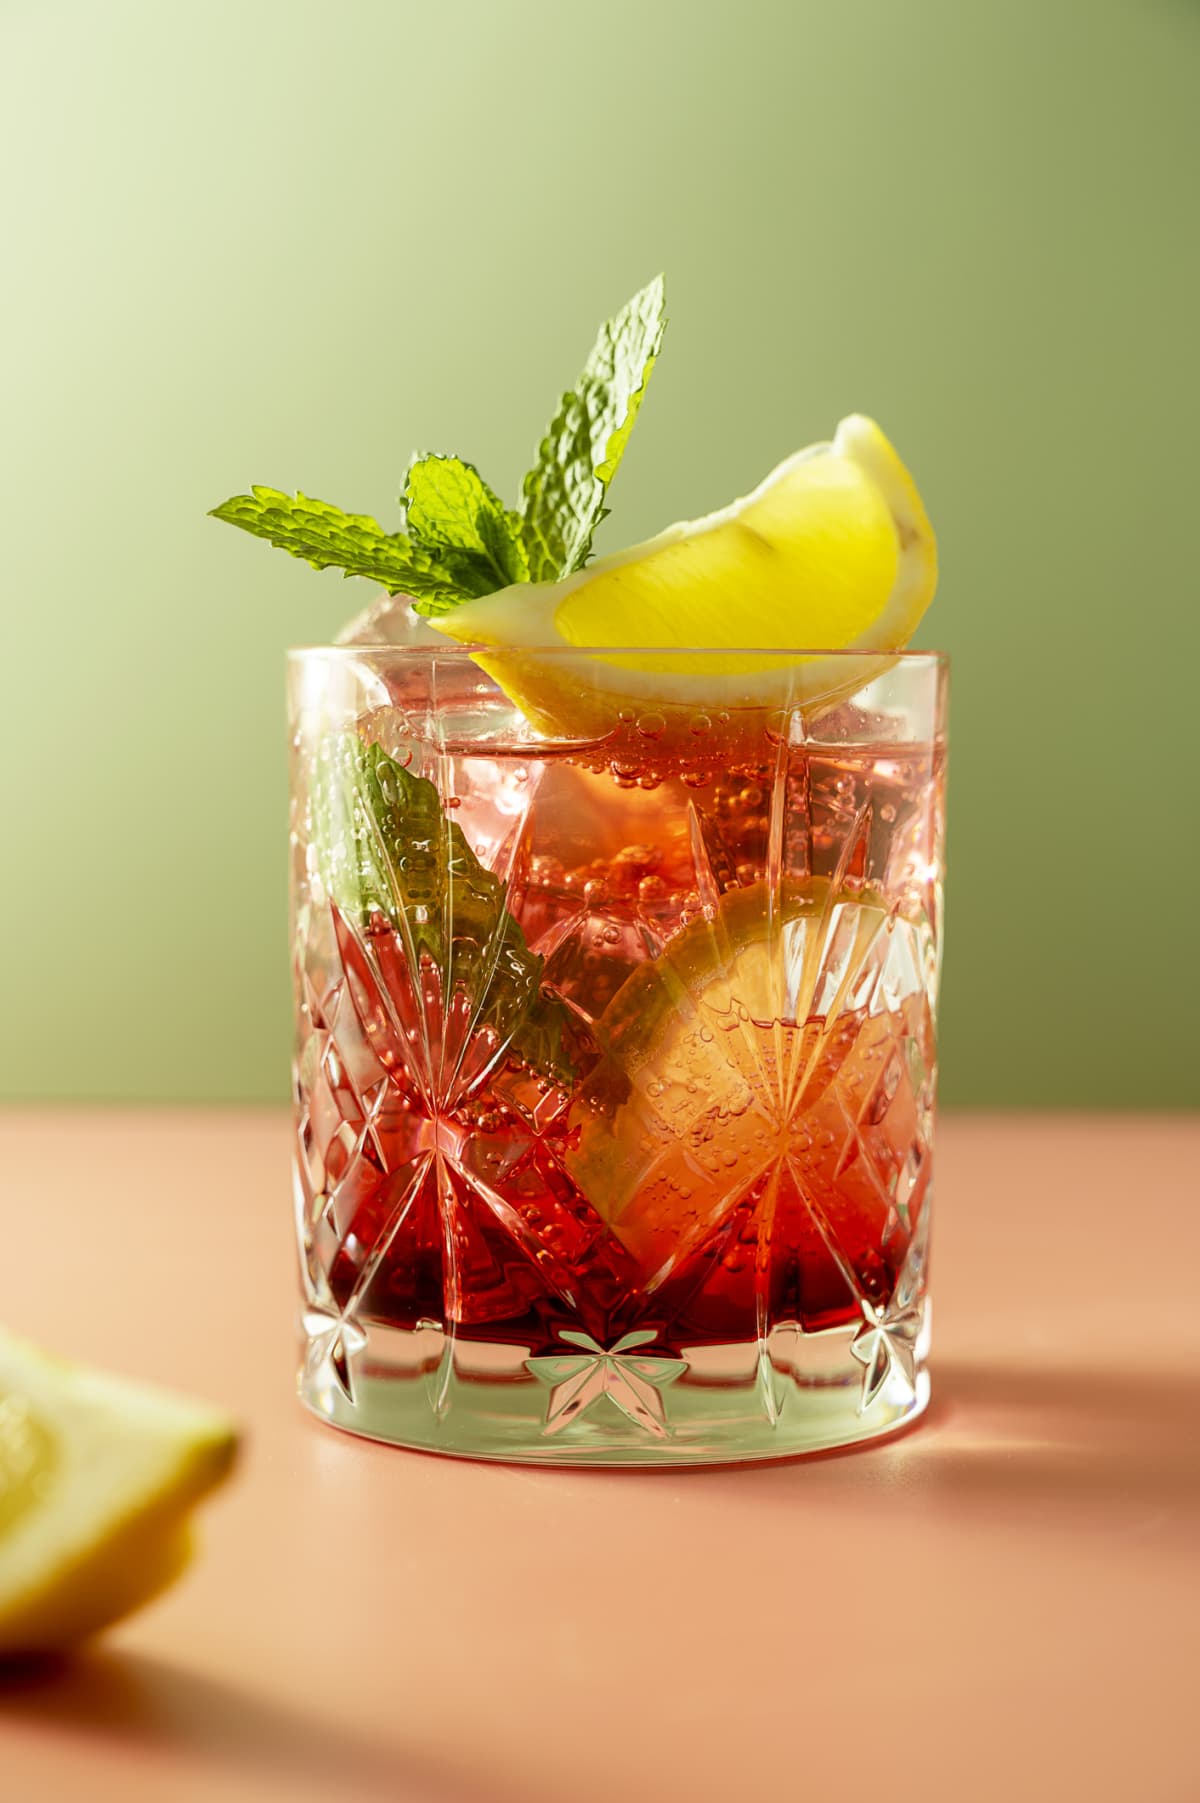 Iced fruit tea or cold berry drink in glass with fresh mint leaves. Refreshing summer drink. Colorful pink and green background